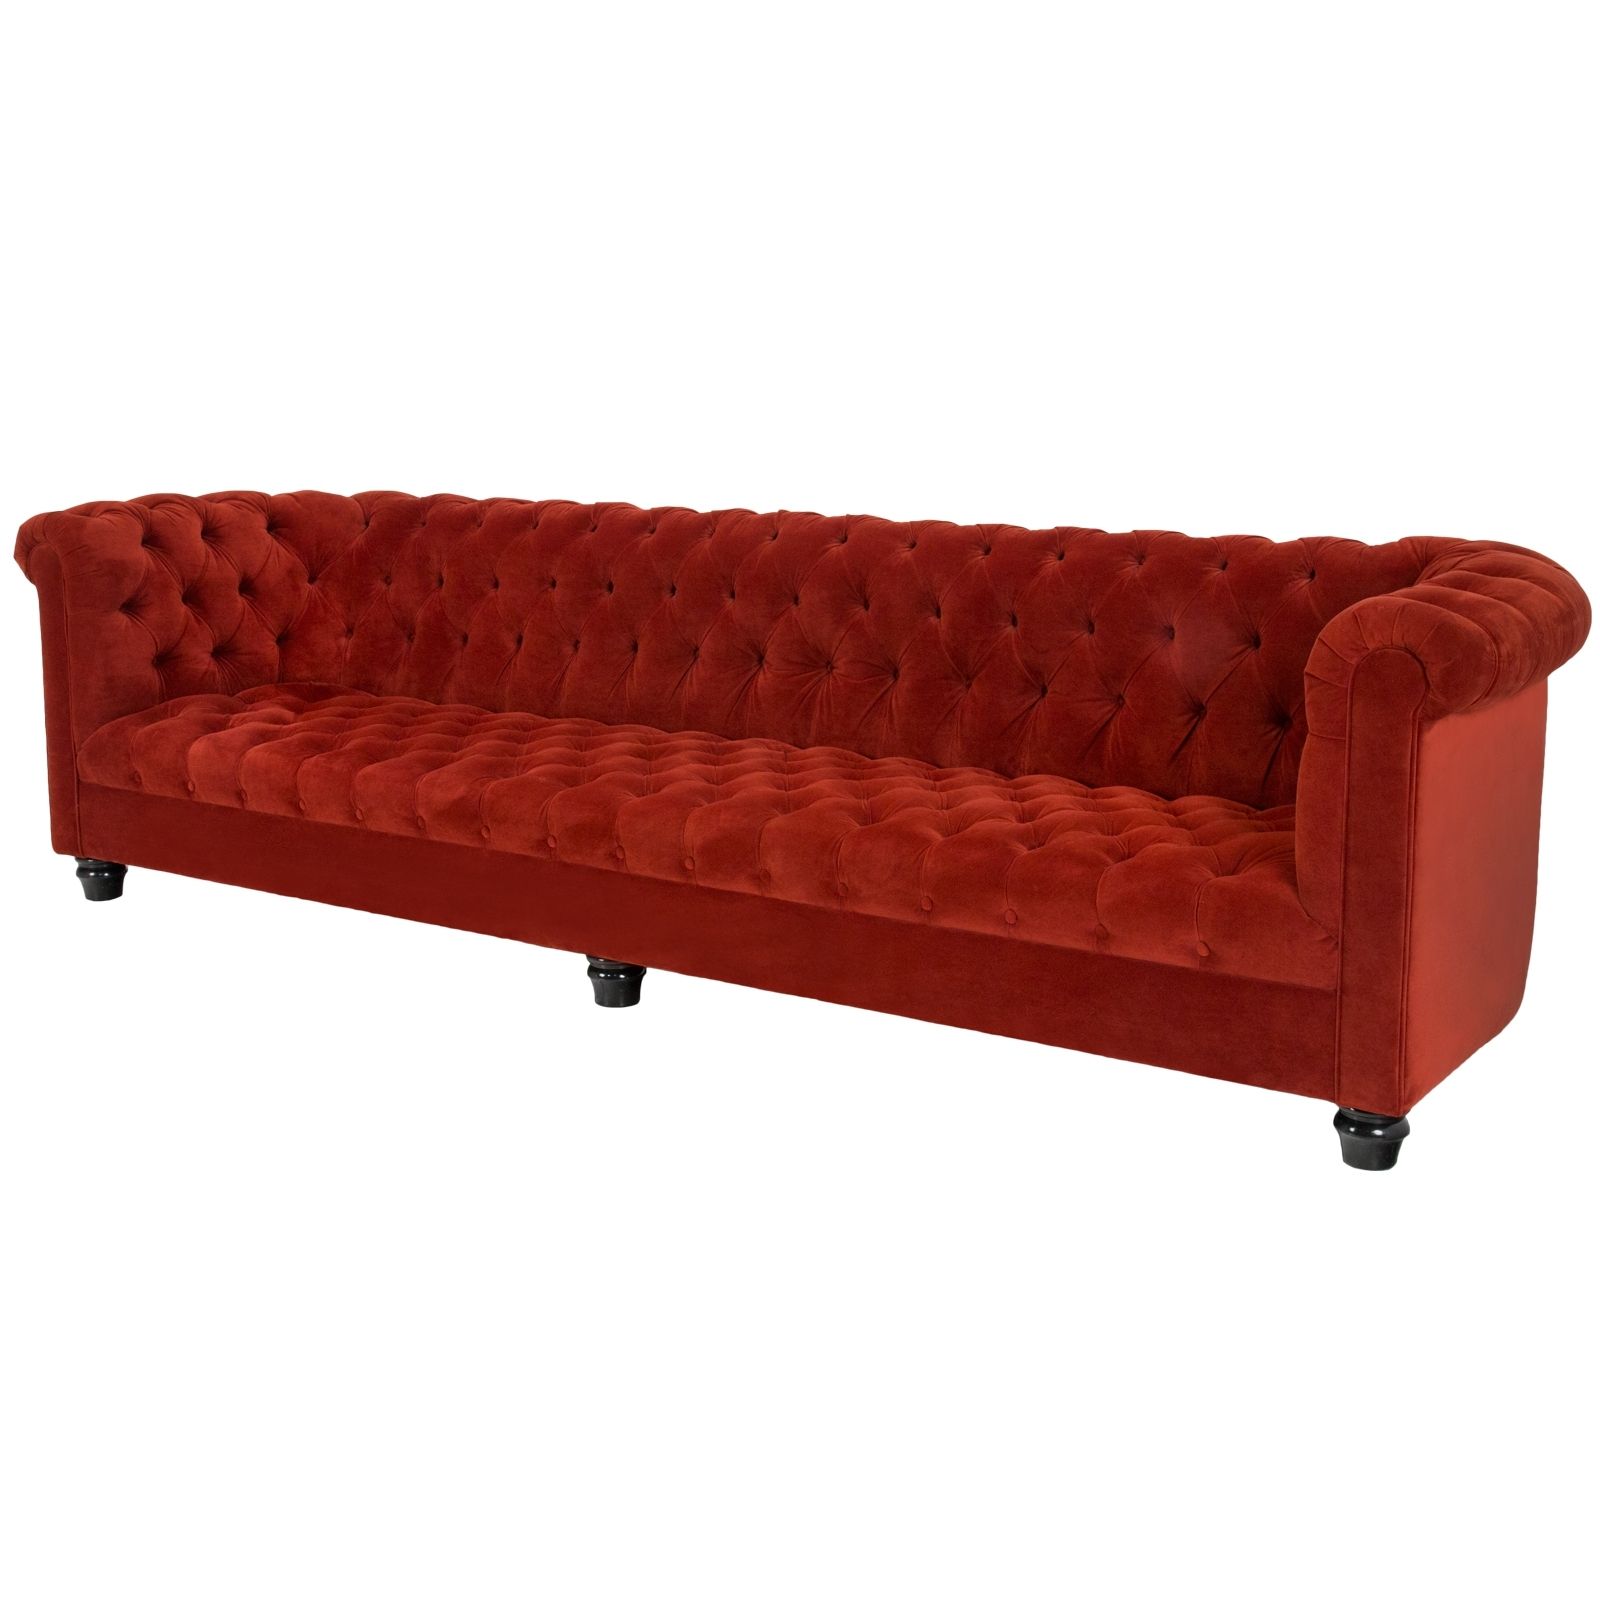 Best And Newest Tufted Sofa Rentals (View 3 of 20)